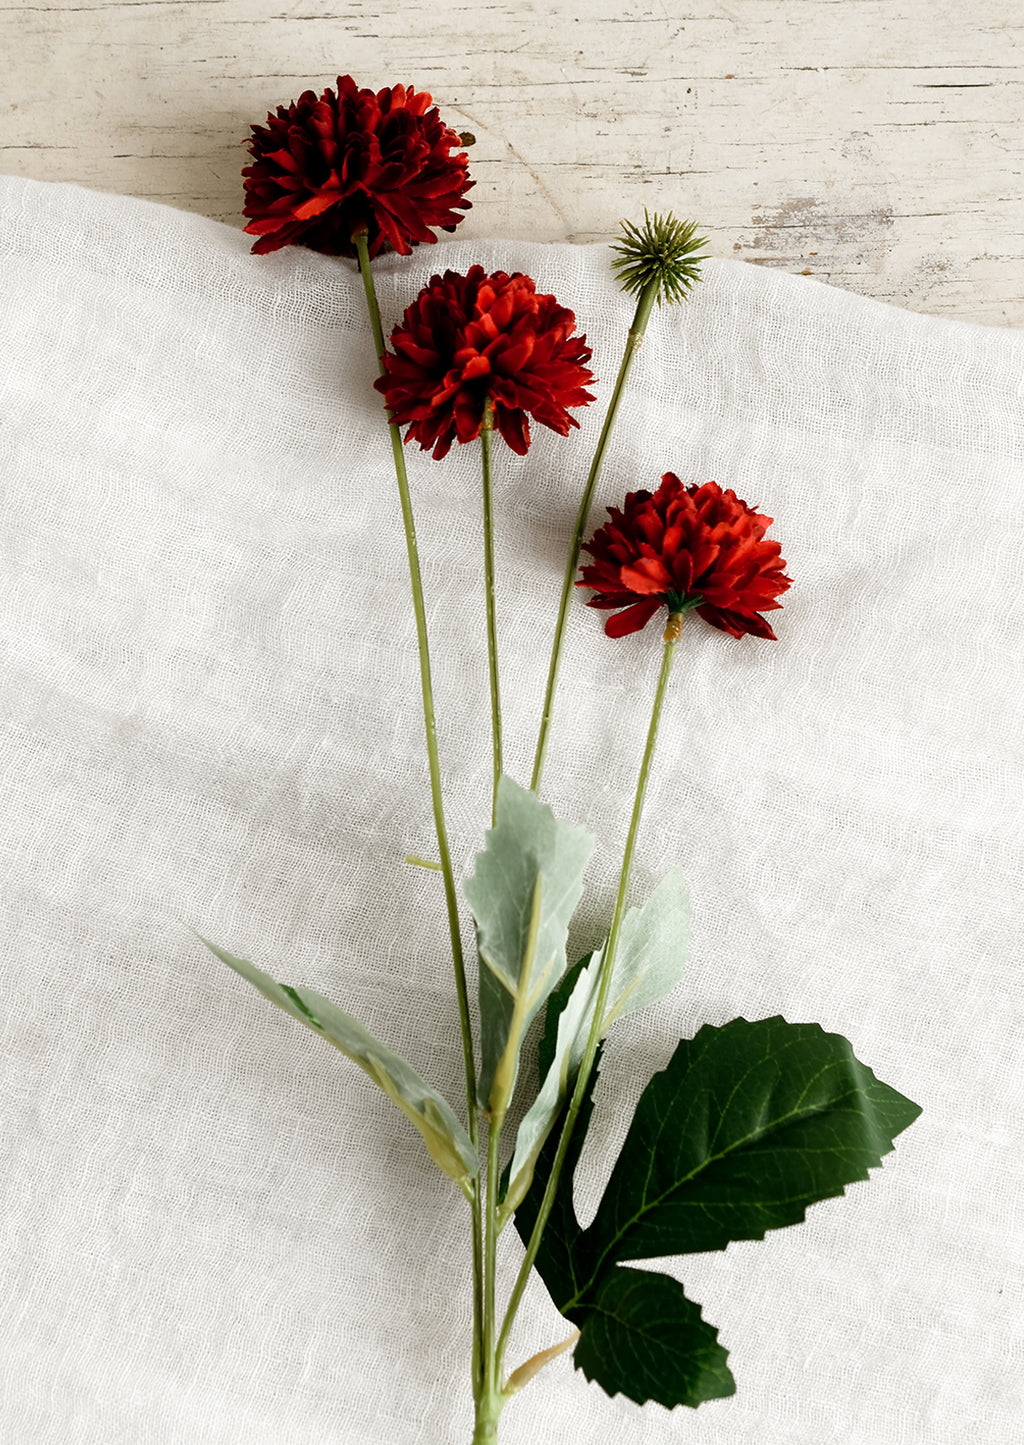 Berry Red: An artificial flower spray in the style of a red mum.